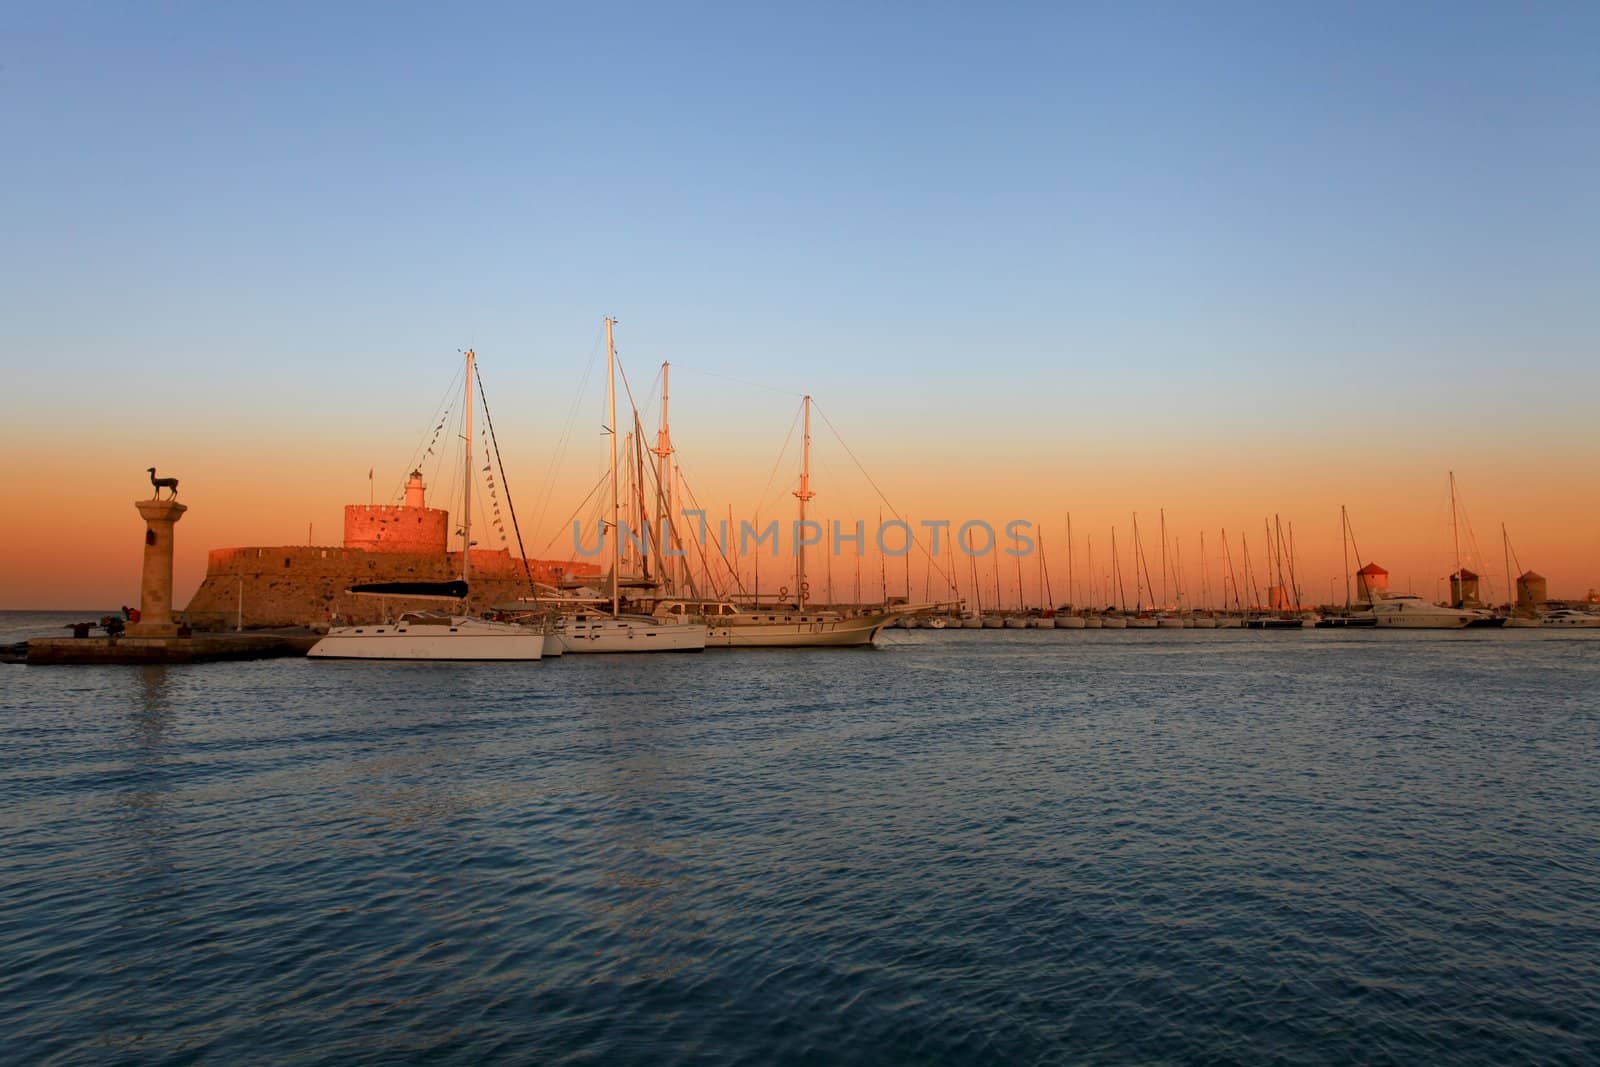 Rhodes harbor and windmills in Greece at sunset by olliemt